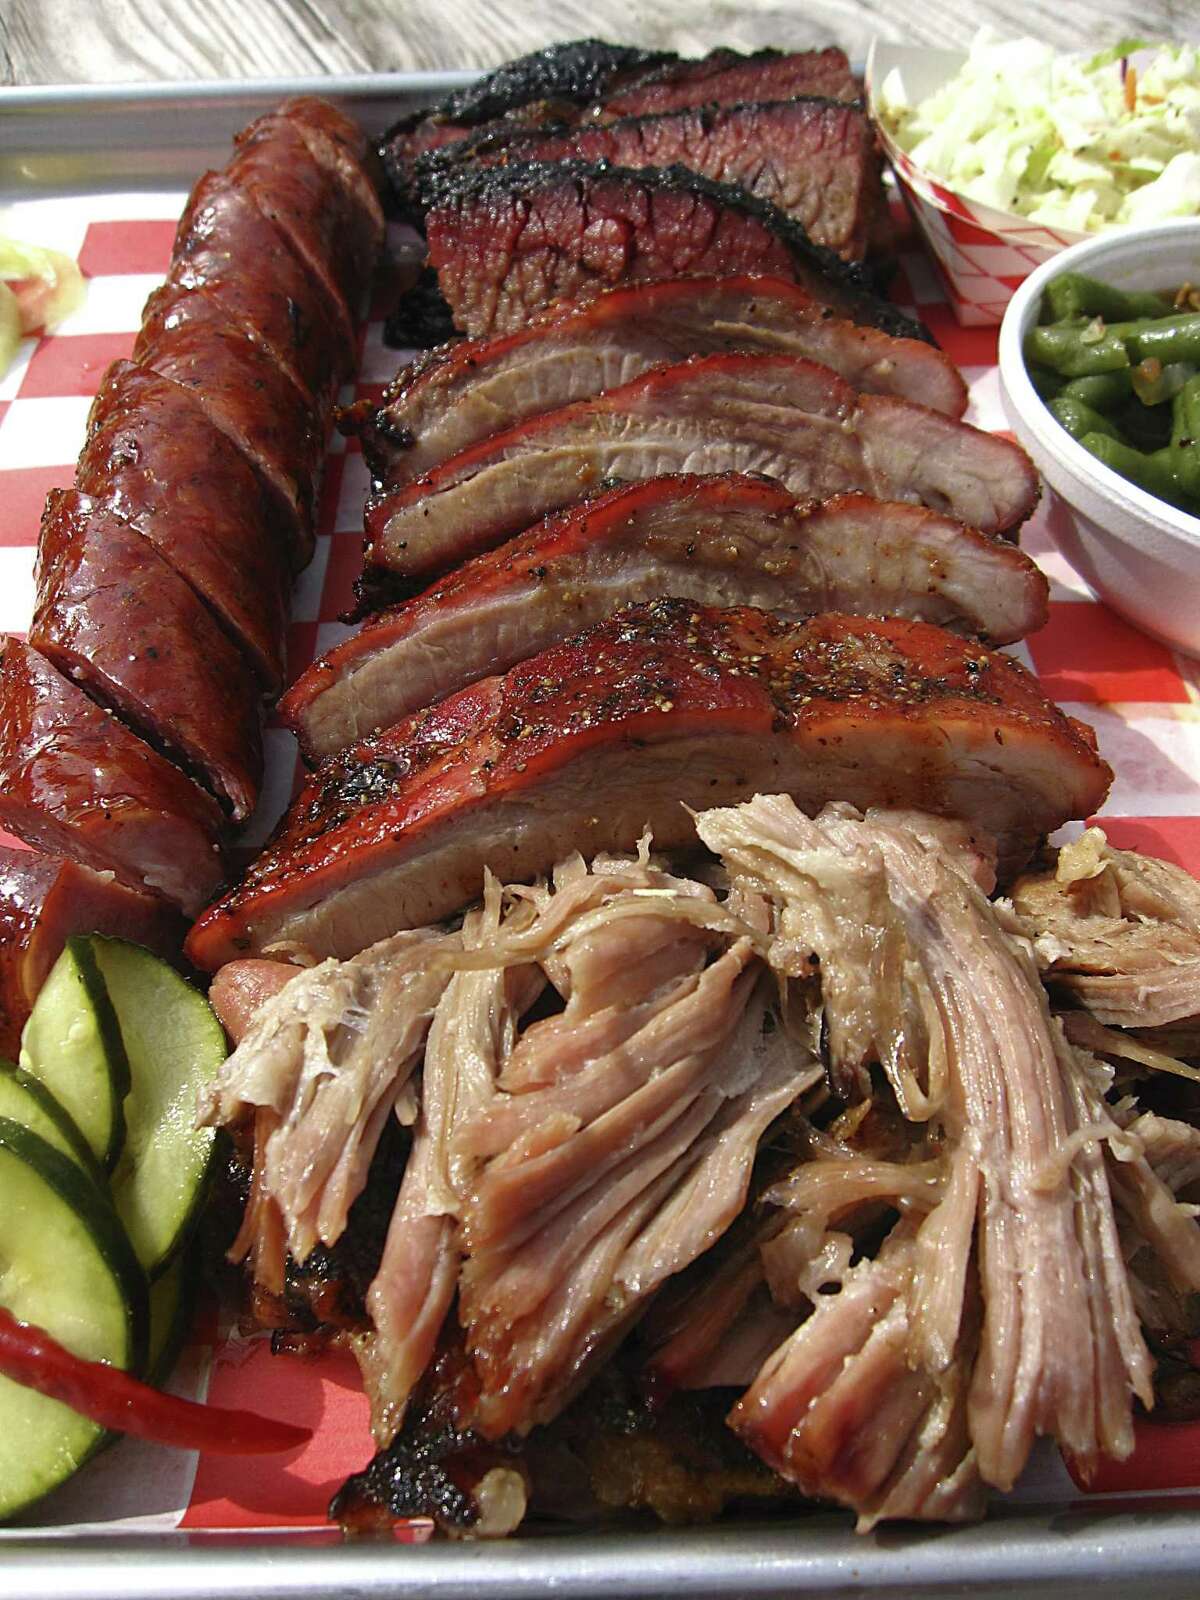 Clockwise from left: sausage, brisket, cole slaw, green beans, pulled pork and housemade pickles from Burnwood '68